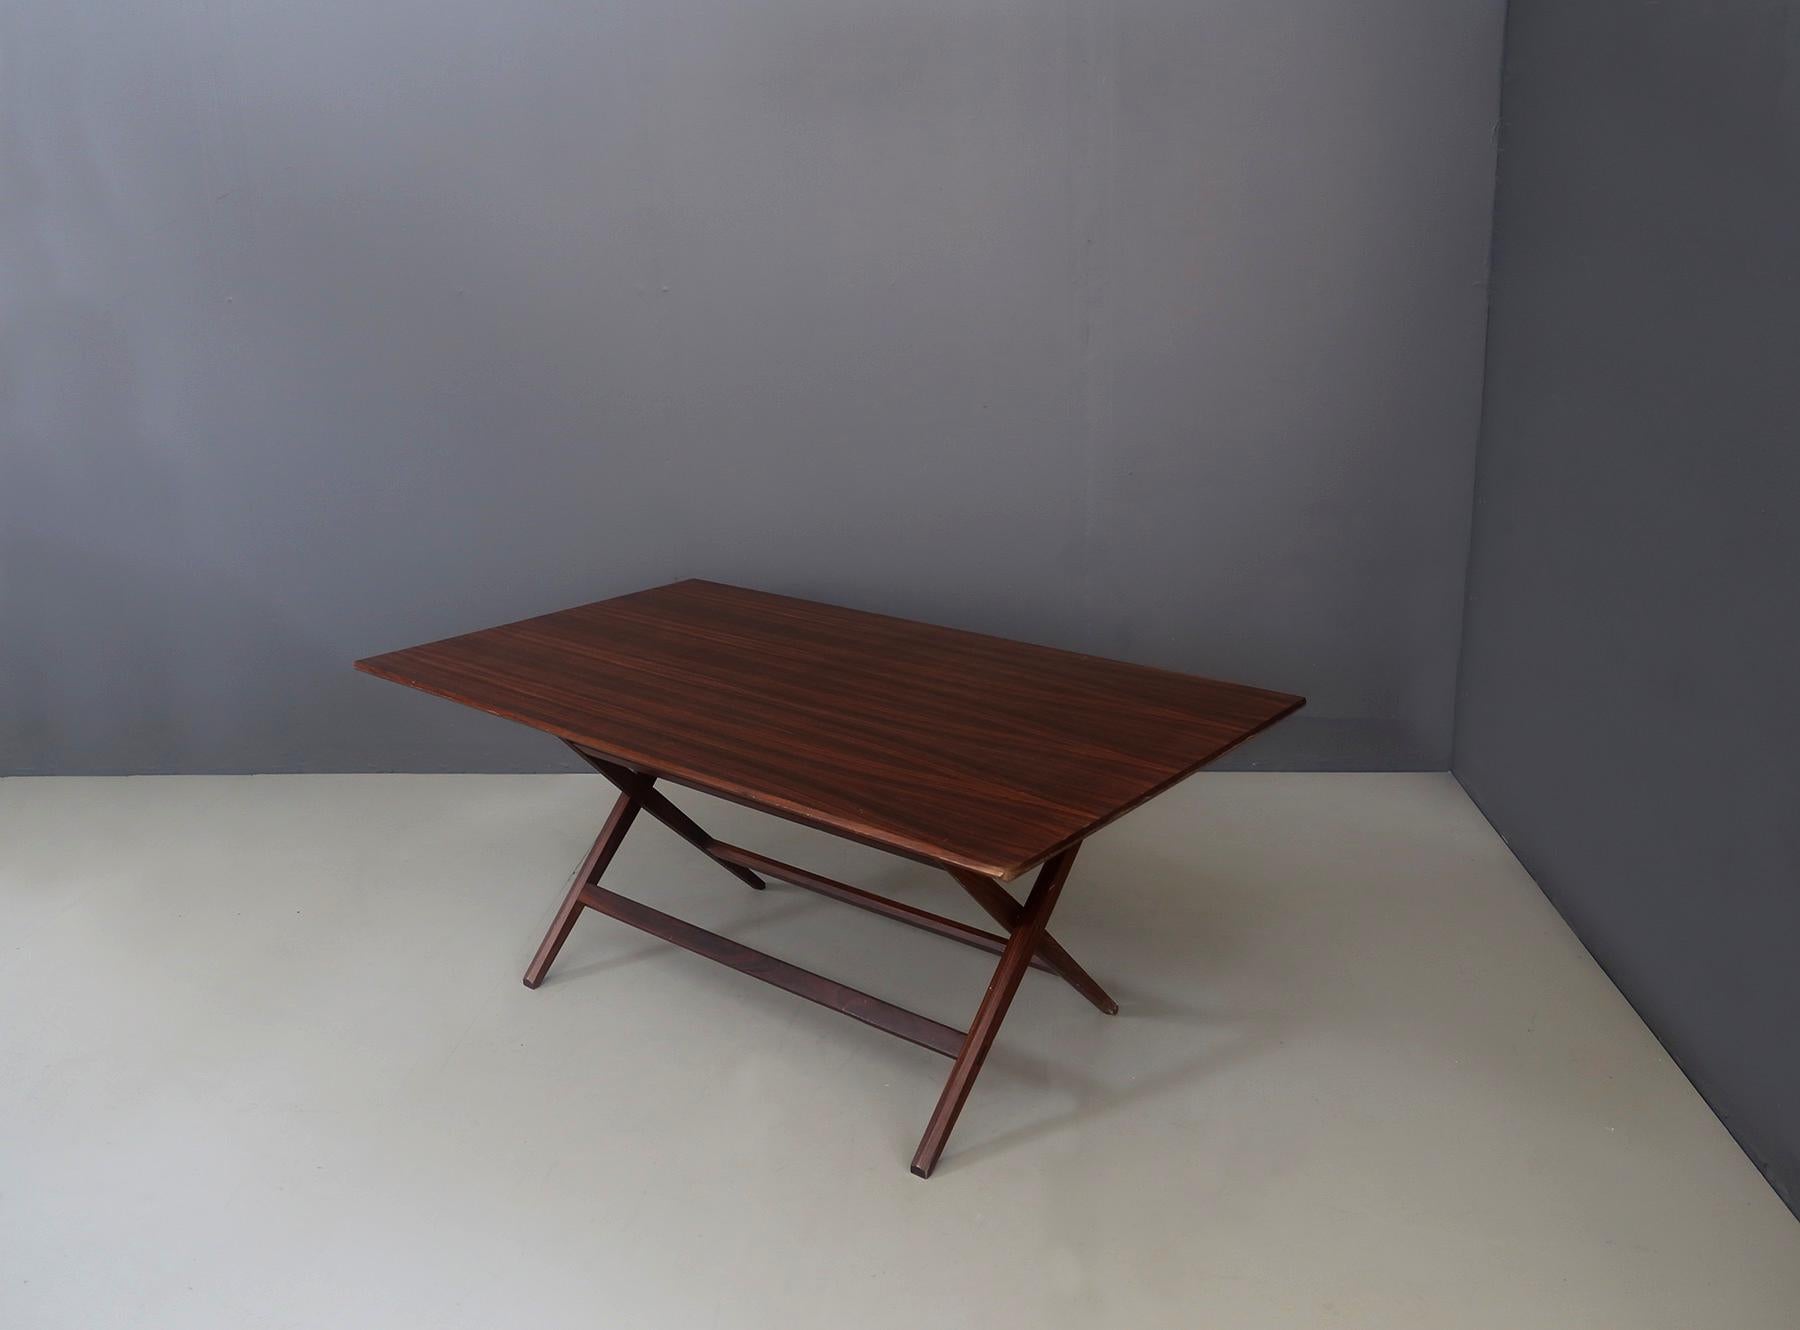 Rare trestle table by Franco Albini from 1950. The table is made entirely of walnut wood. Its legs, made in an X-shape, close easily towards the inside to allow its complete closure and its wooden support surface is completely detached from the legs